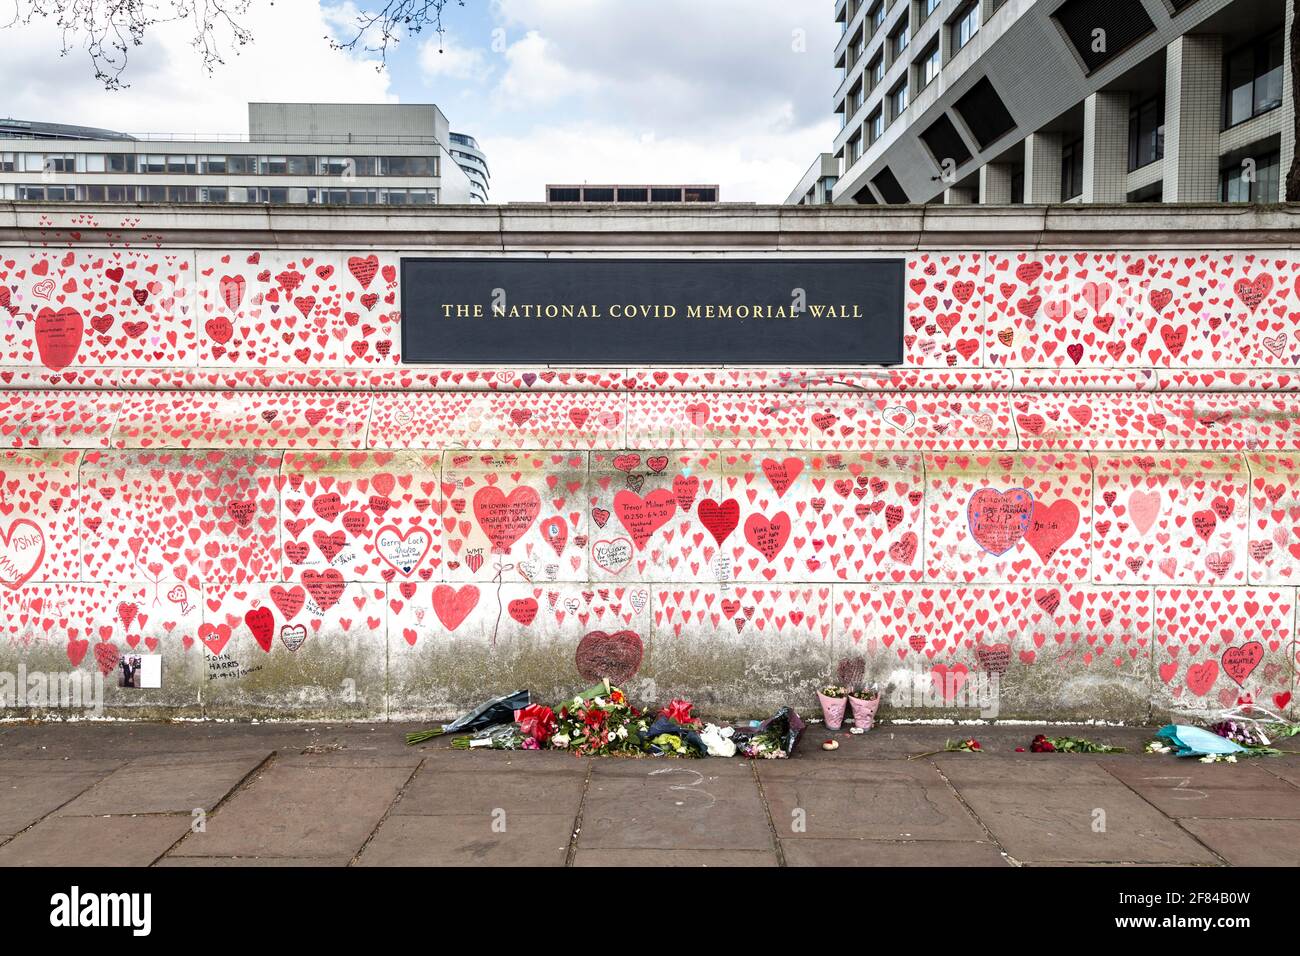 11 April 2021, London, UK - Hearts drawn on the The National COVID Memorial Wall along the South Bank as tribute to those who died during the coronavirus pandemic Stock Photo